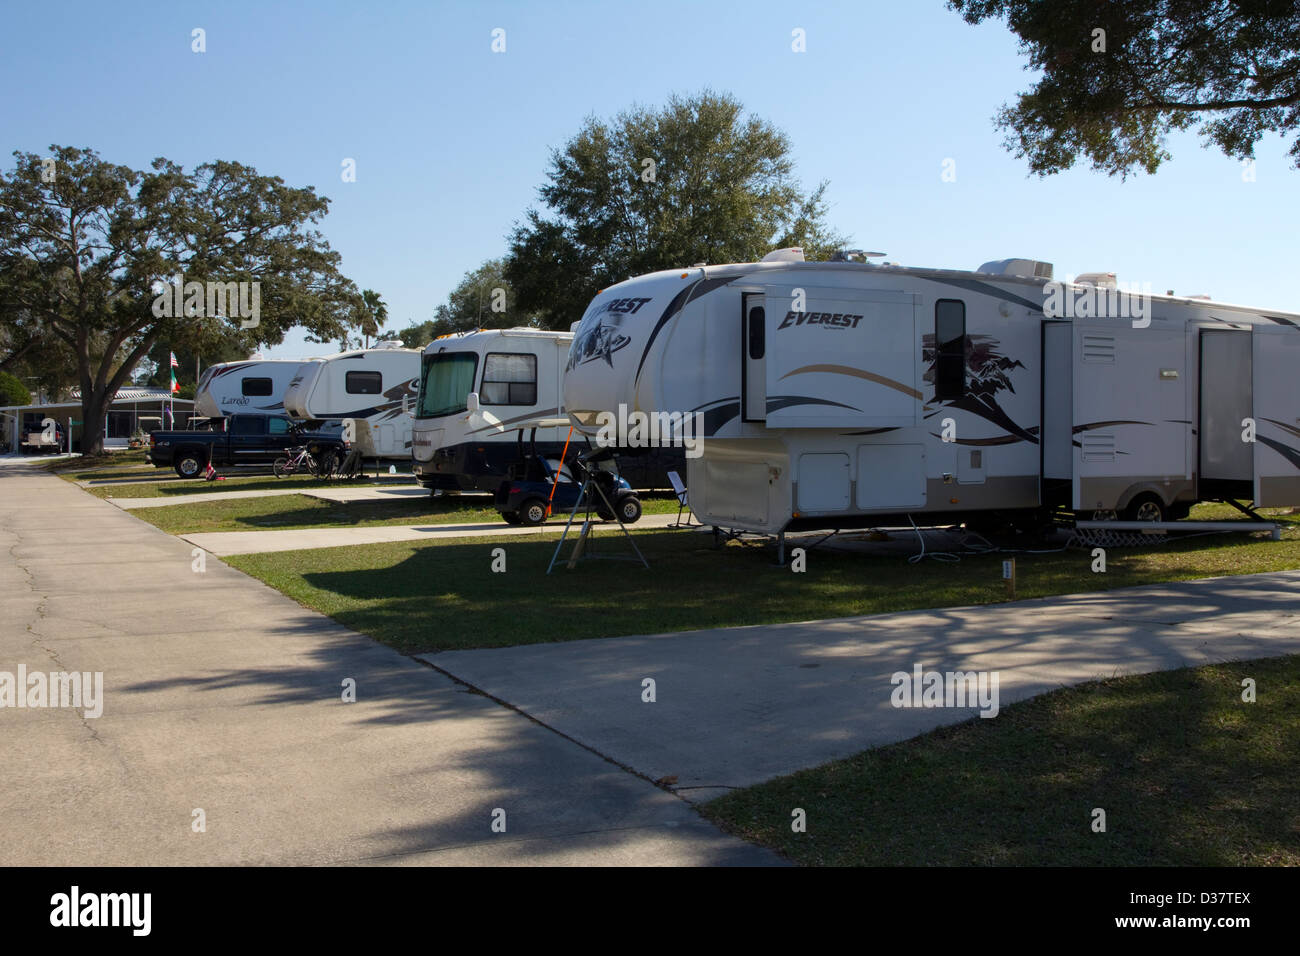 Orange City RV Resort offers luxury-level camping just a short distance from DeLeon Springs State Park, FL Stock Photo